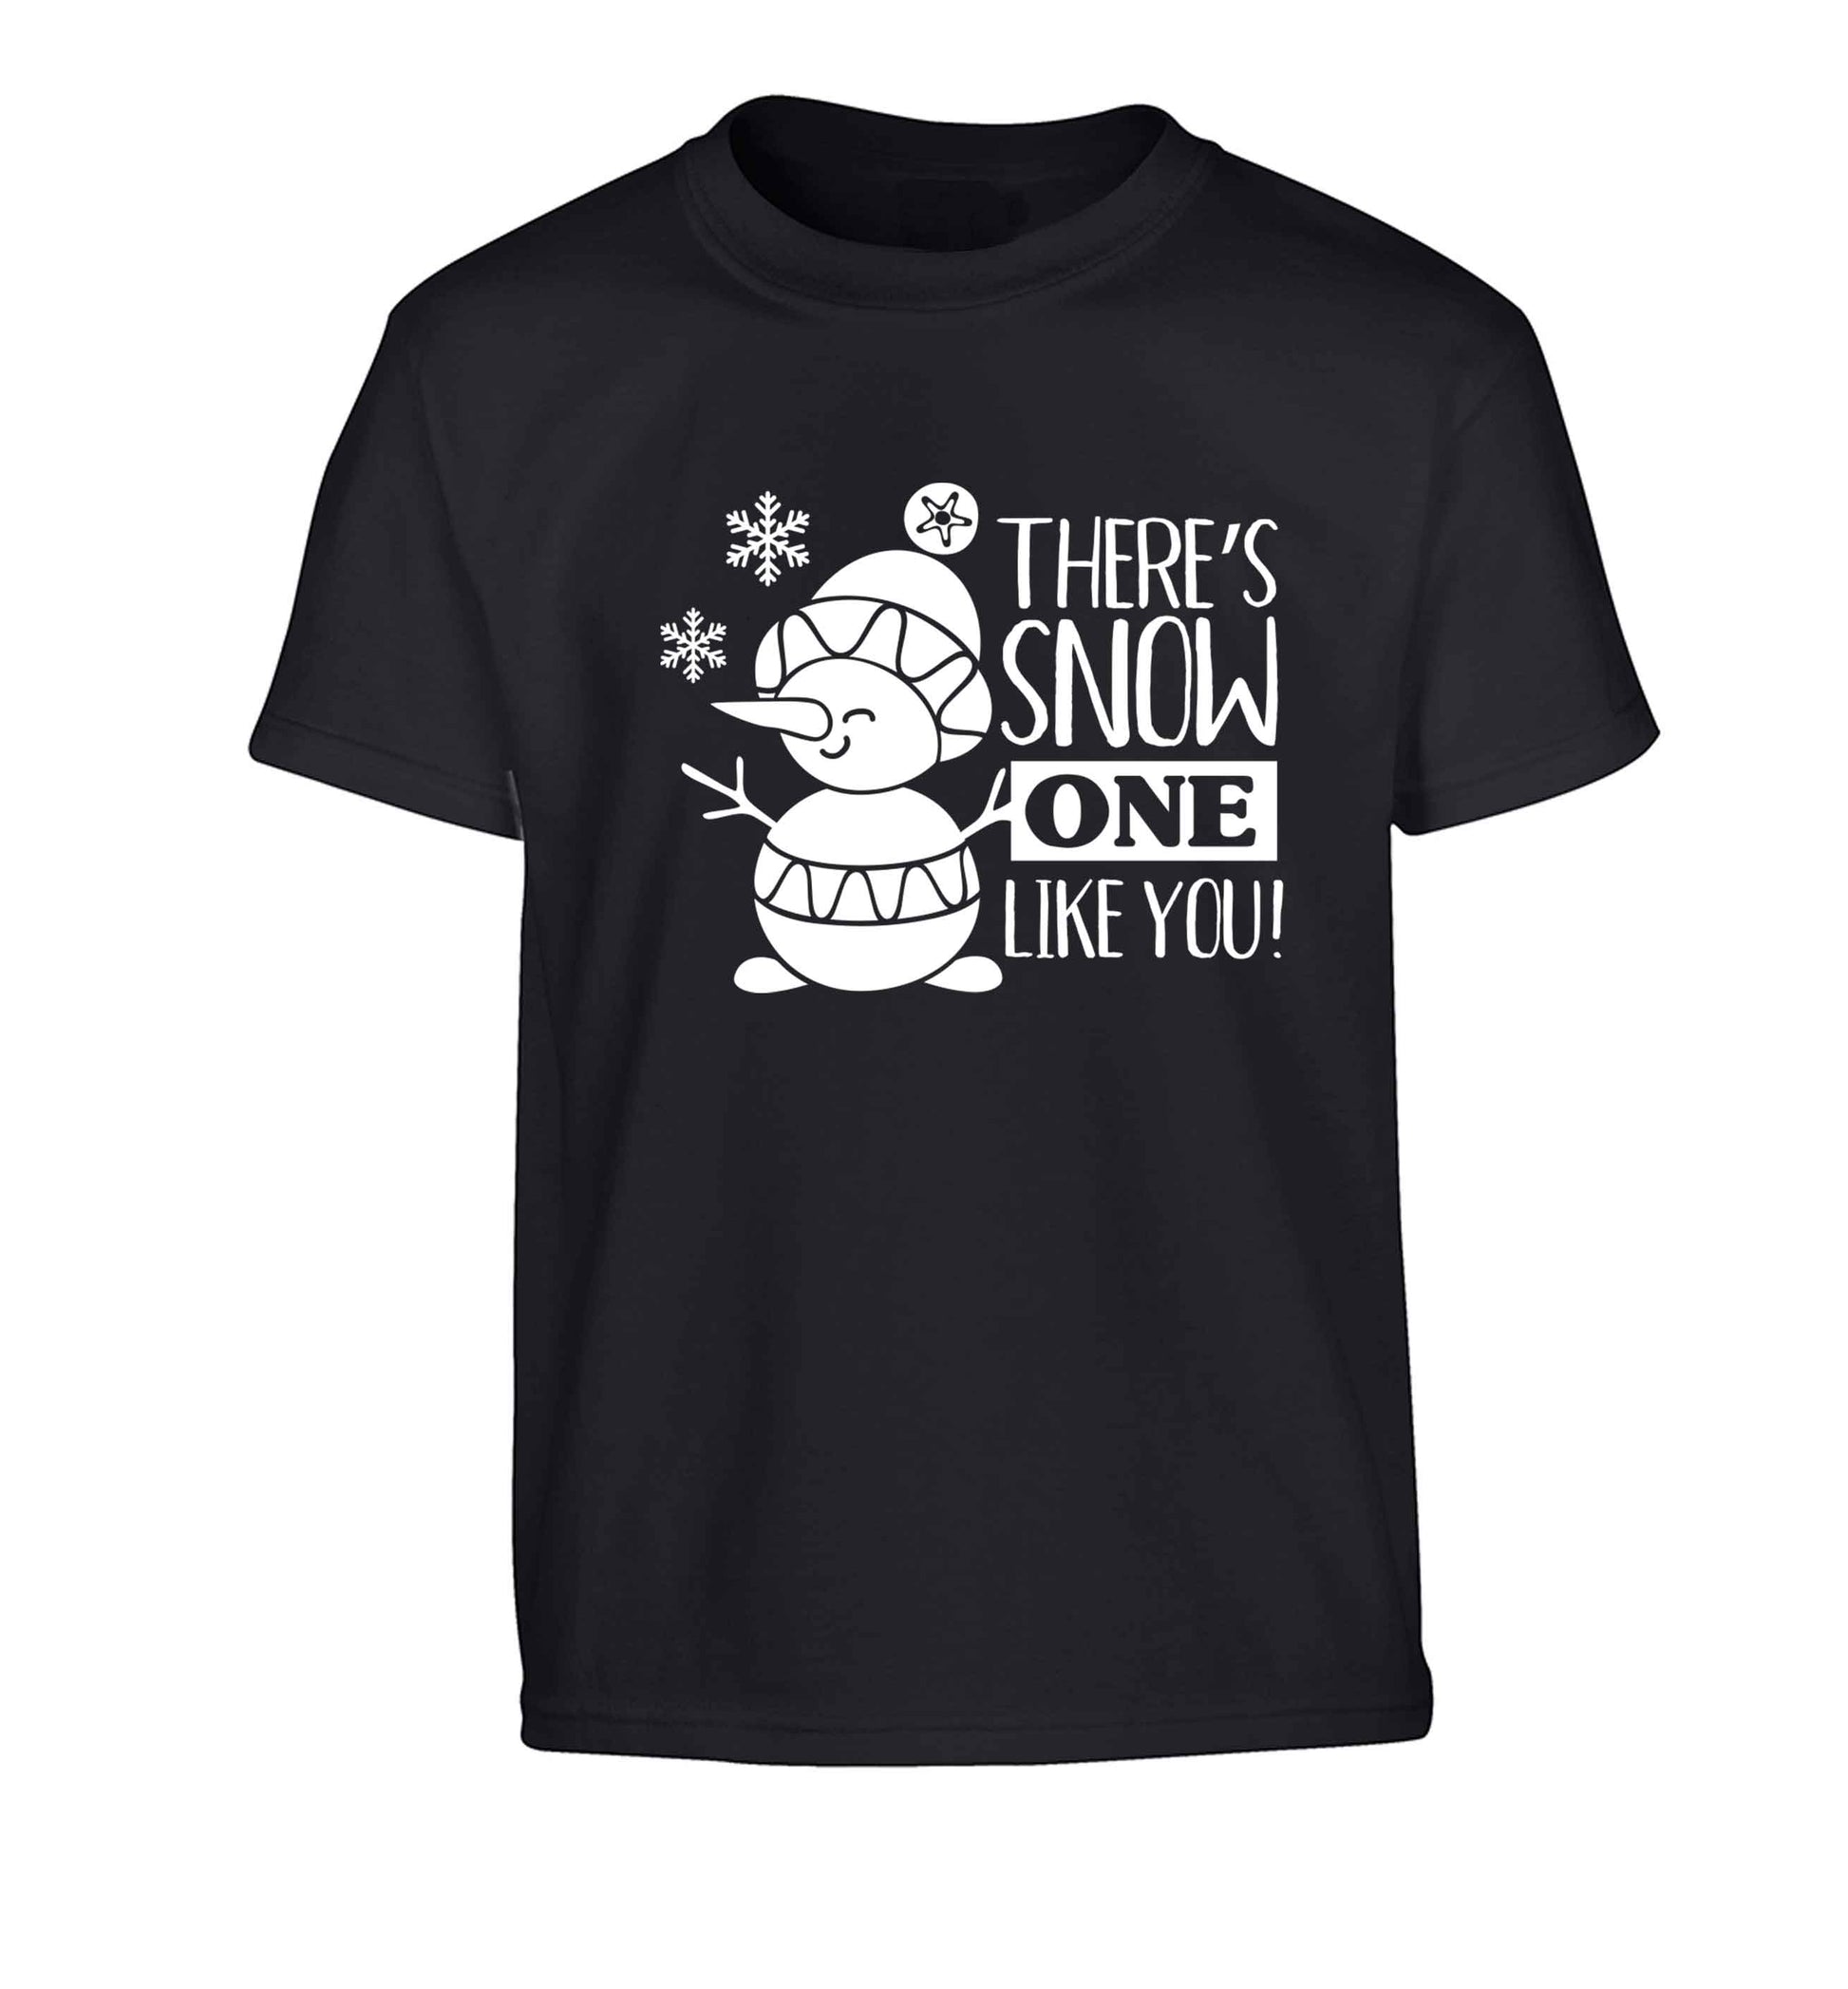 There's snow one like you Children's black Tshirt 12-13 Years